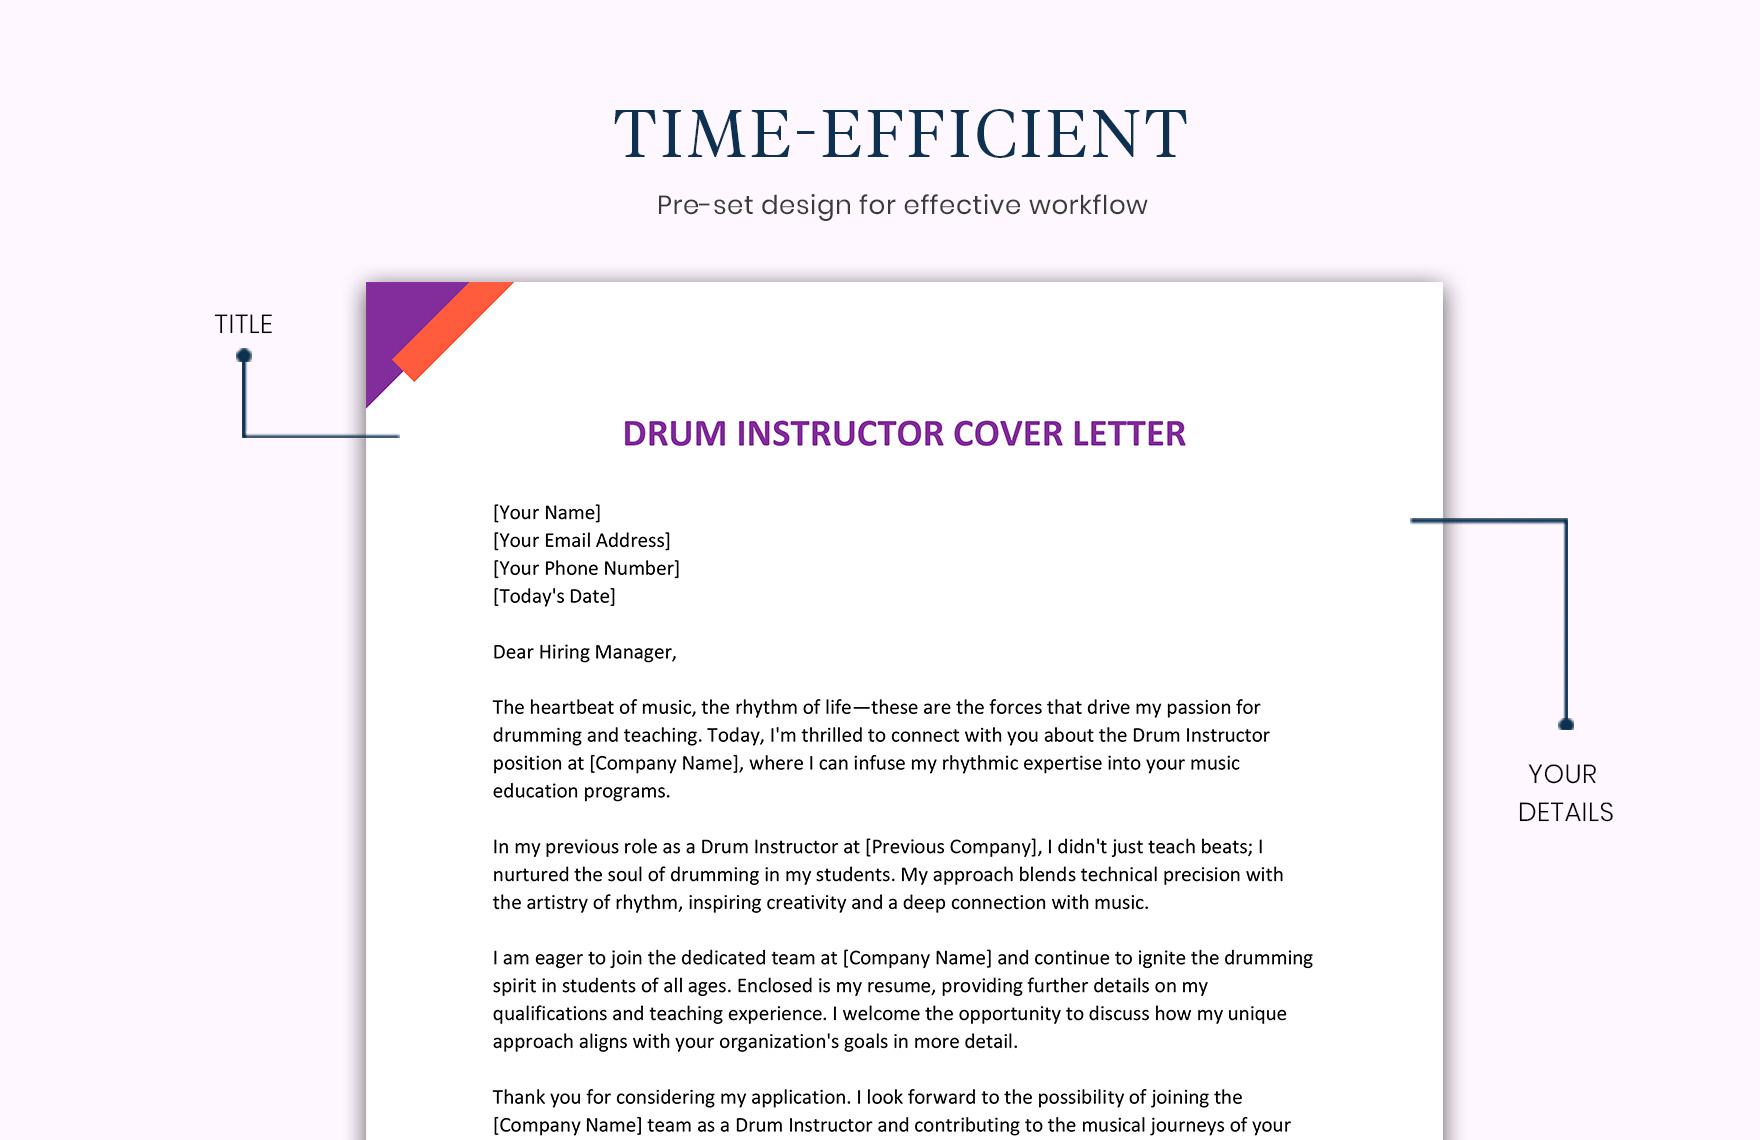 Drum Instructor Cover Letter